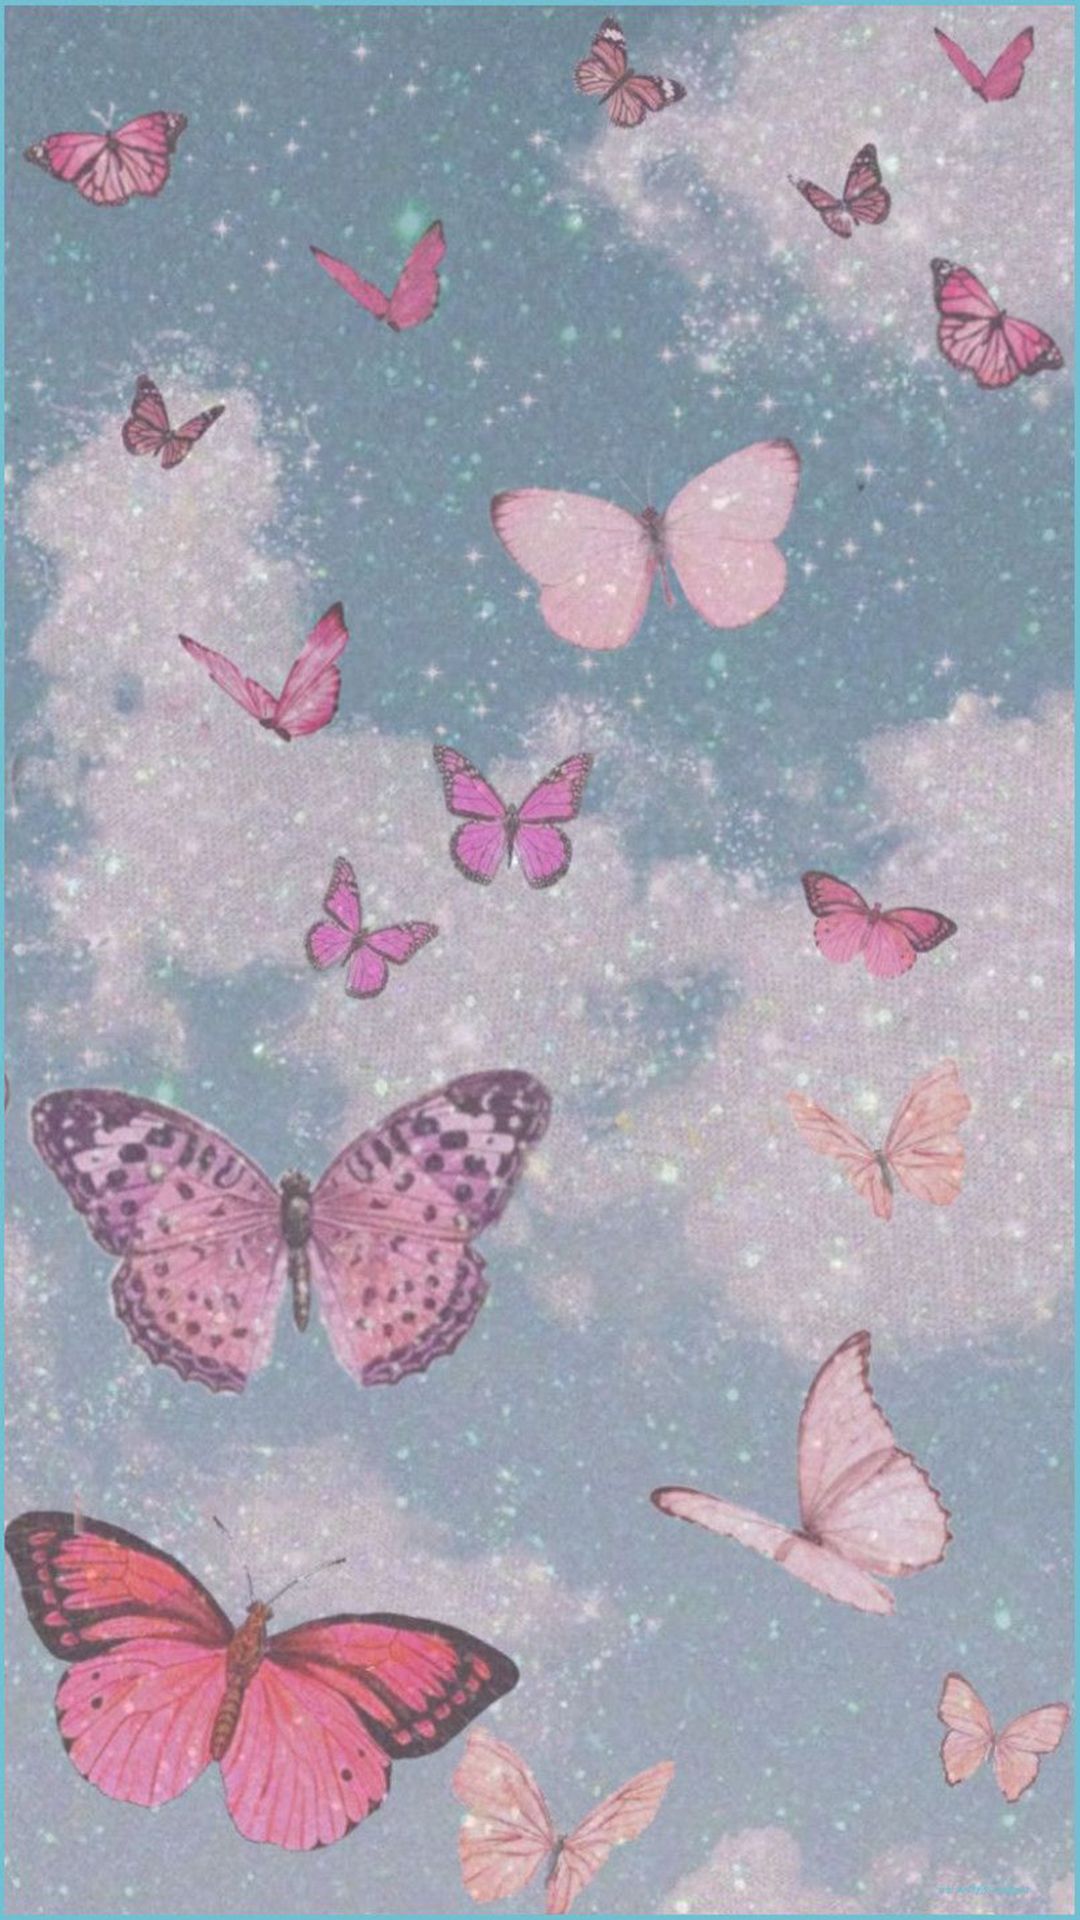 Pink butterfly wallpaper aesthetic for phone background, phone background, phone wallpaper, aesthetic wallpaper, aesthetic phone background, aesthetic phone wallpaper, butterfly wallpaper, butterfly phone background, butterfly phone wallpaper, pink butterfly wallpaper, pink butterfly phone background, pink butterfly phone wallpaper - Butterfly